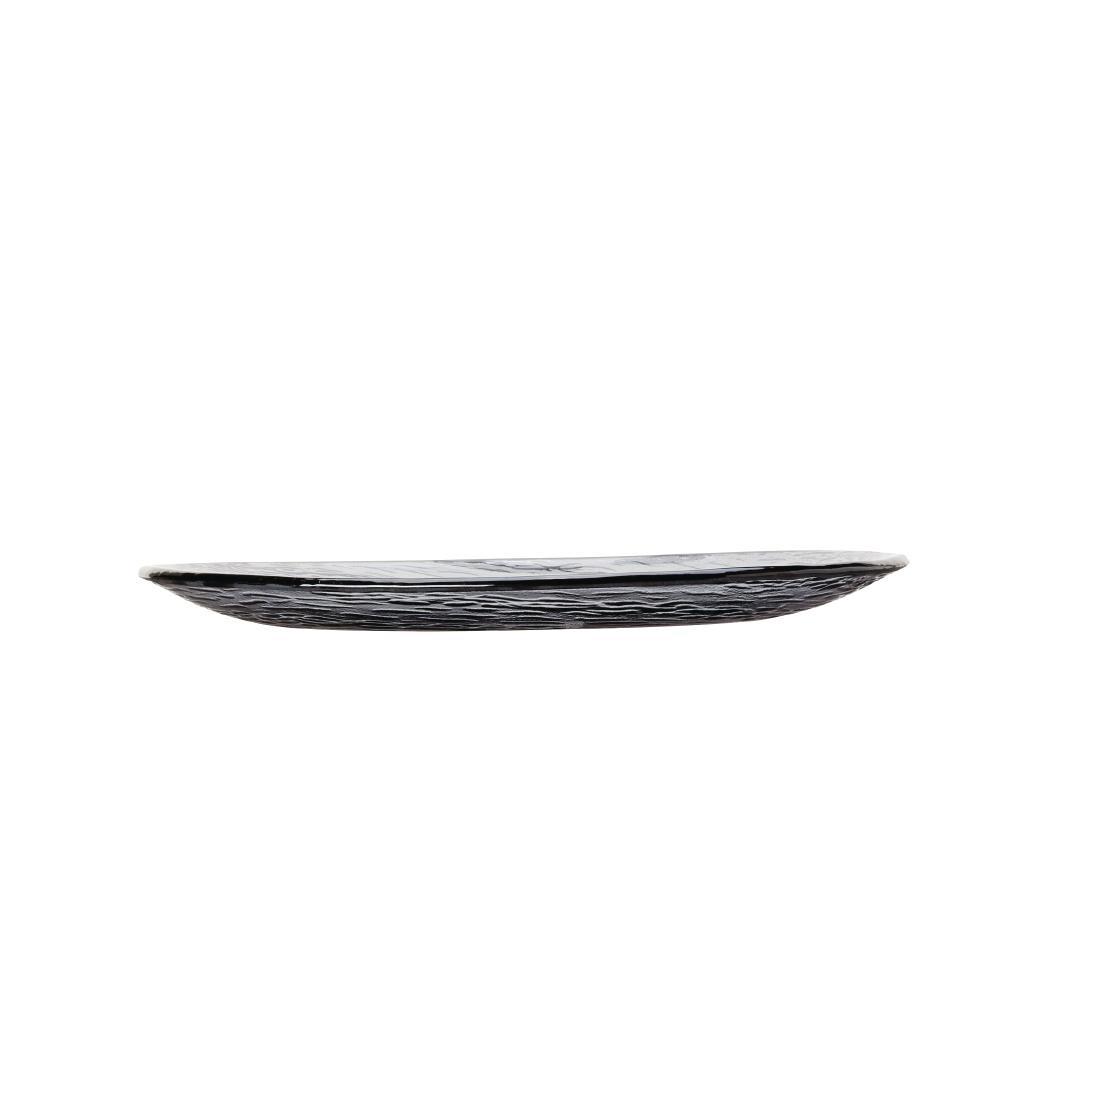 Steelite Scape Glass Platters 300mm Smoked (Pack of 6) - VV721  - 2